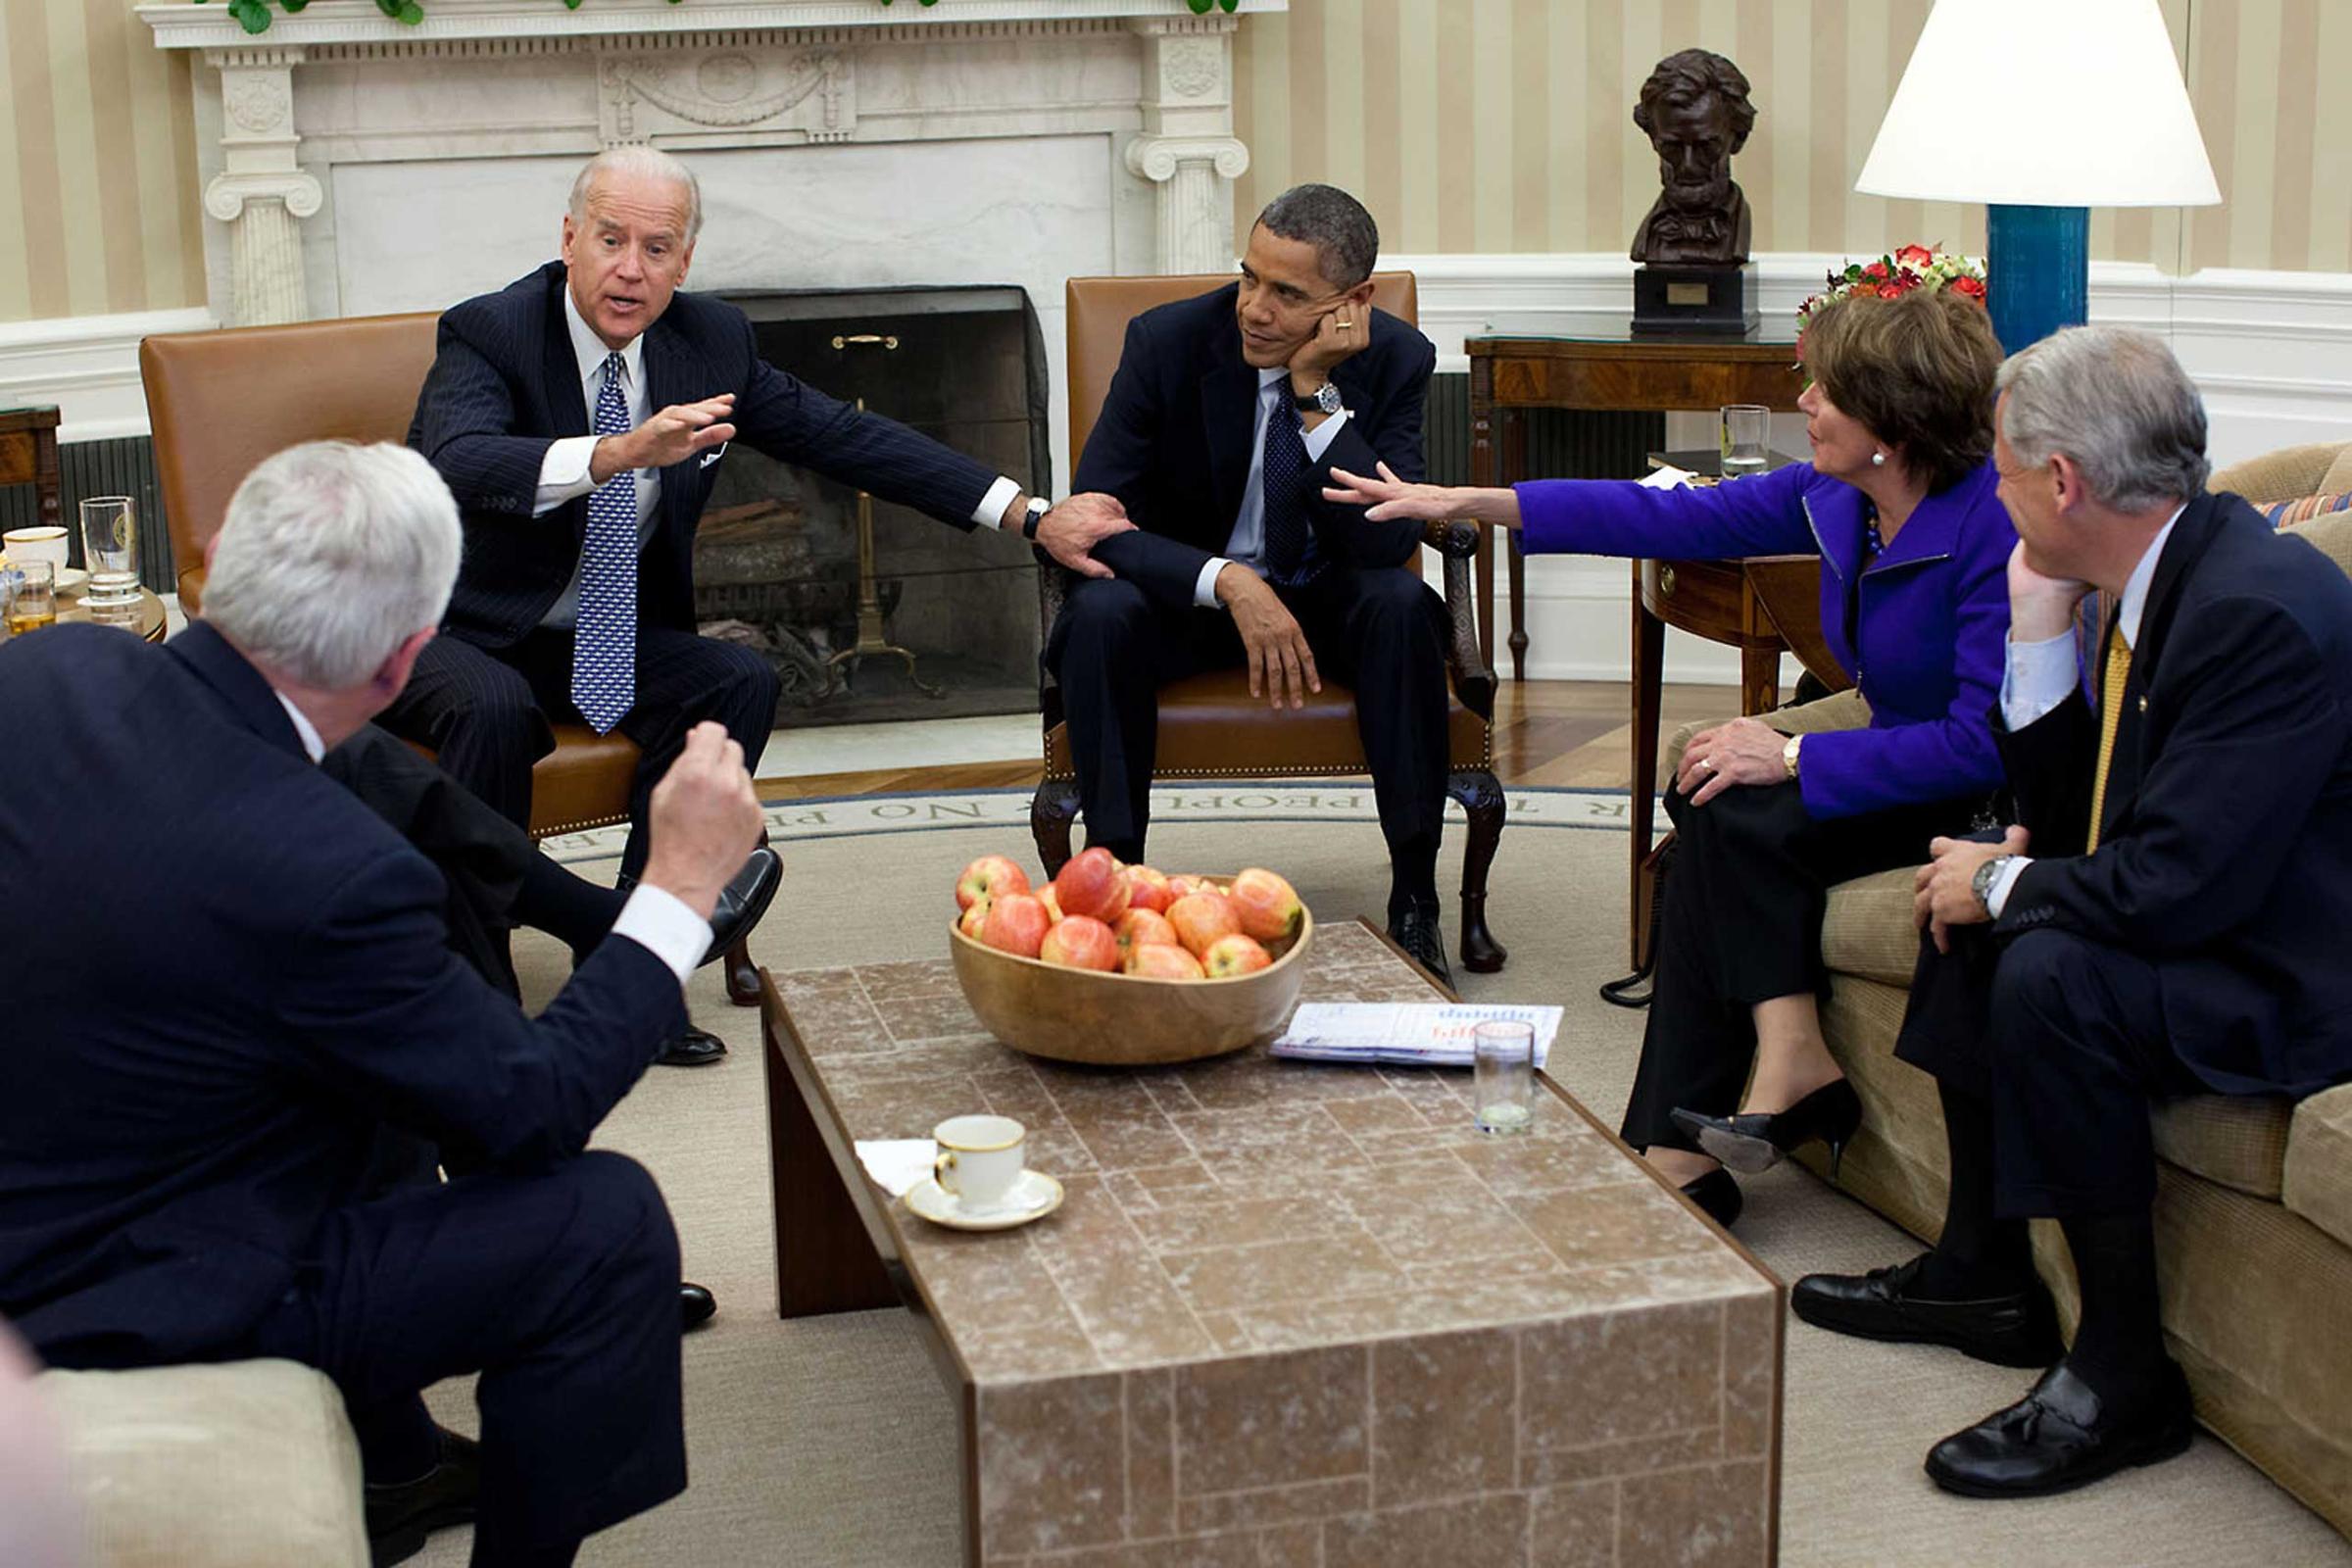 "Usually the best moments at meetings are before and after the participants actually sit down. In this case, though, there was an interesting juxtaposition of gestures as the President and Vice President met with the House Democratic Leadership in the Oval Office, Nov. 1, 2011."